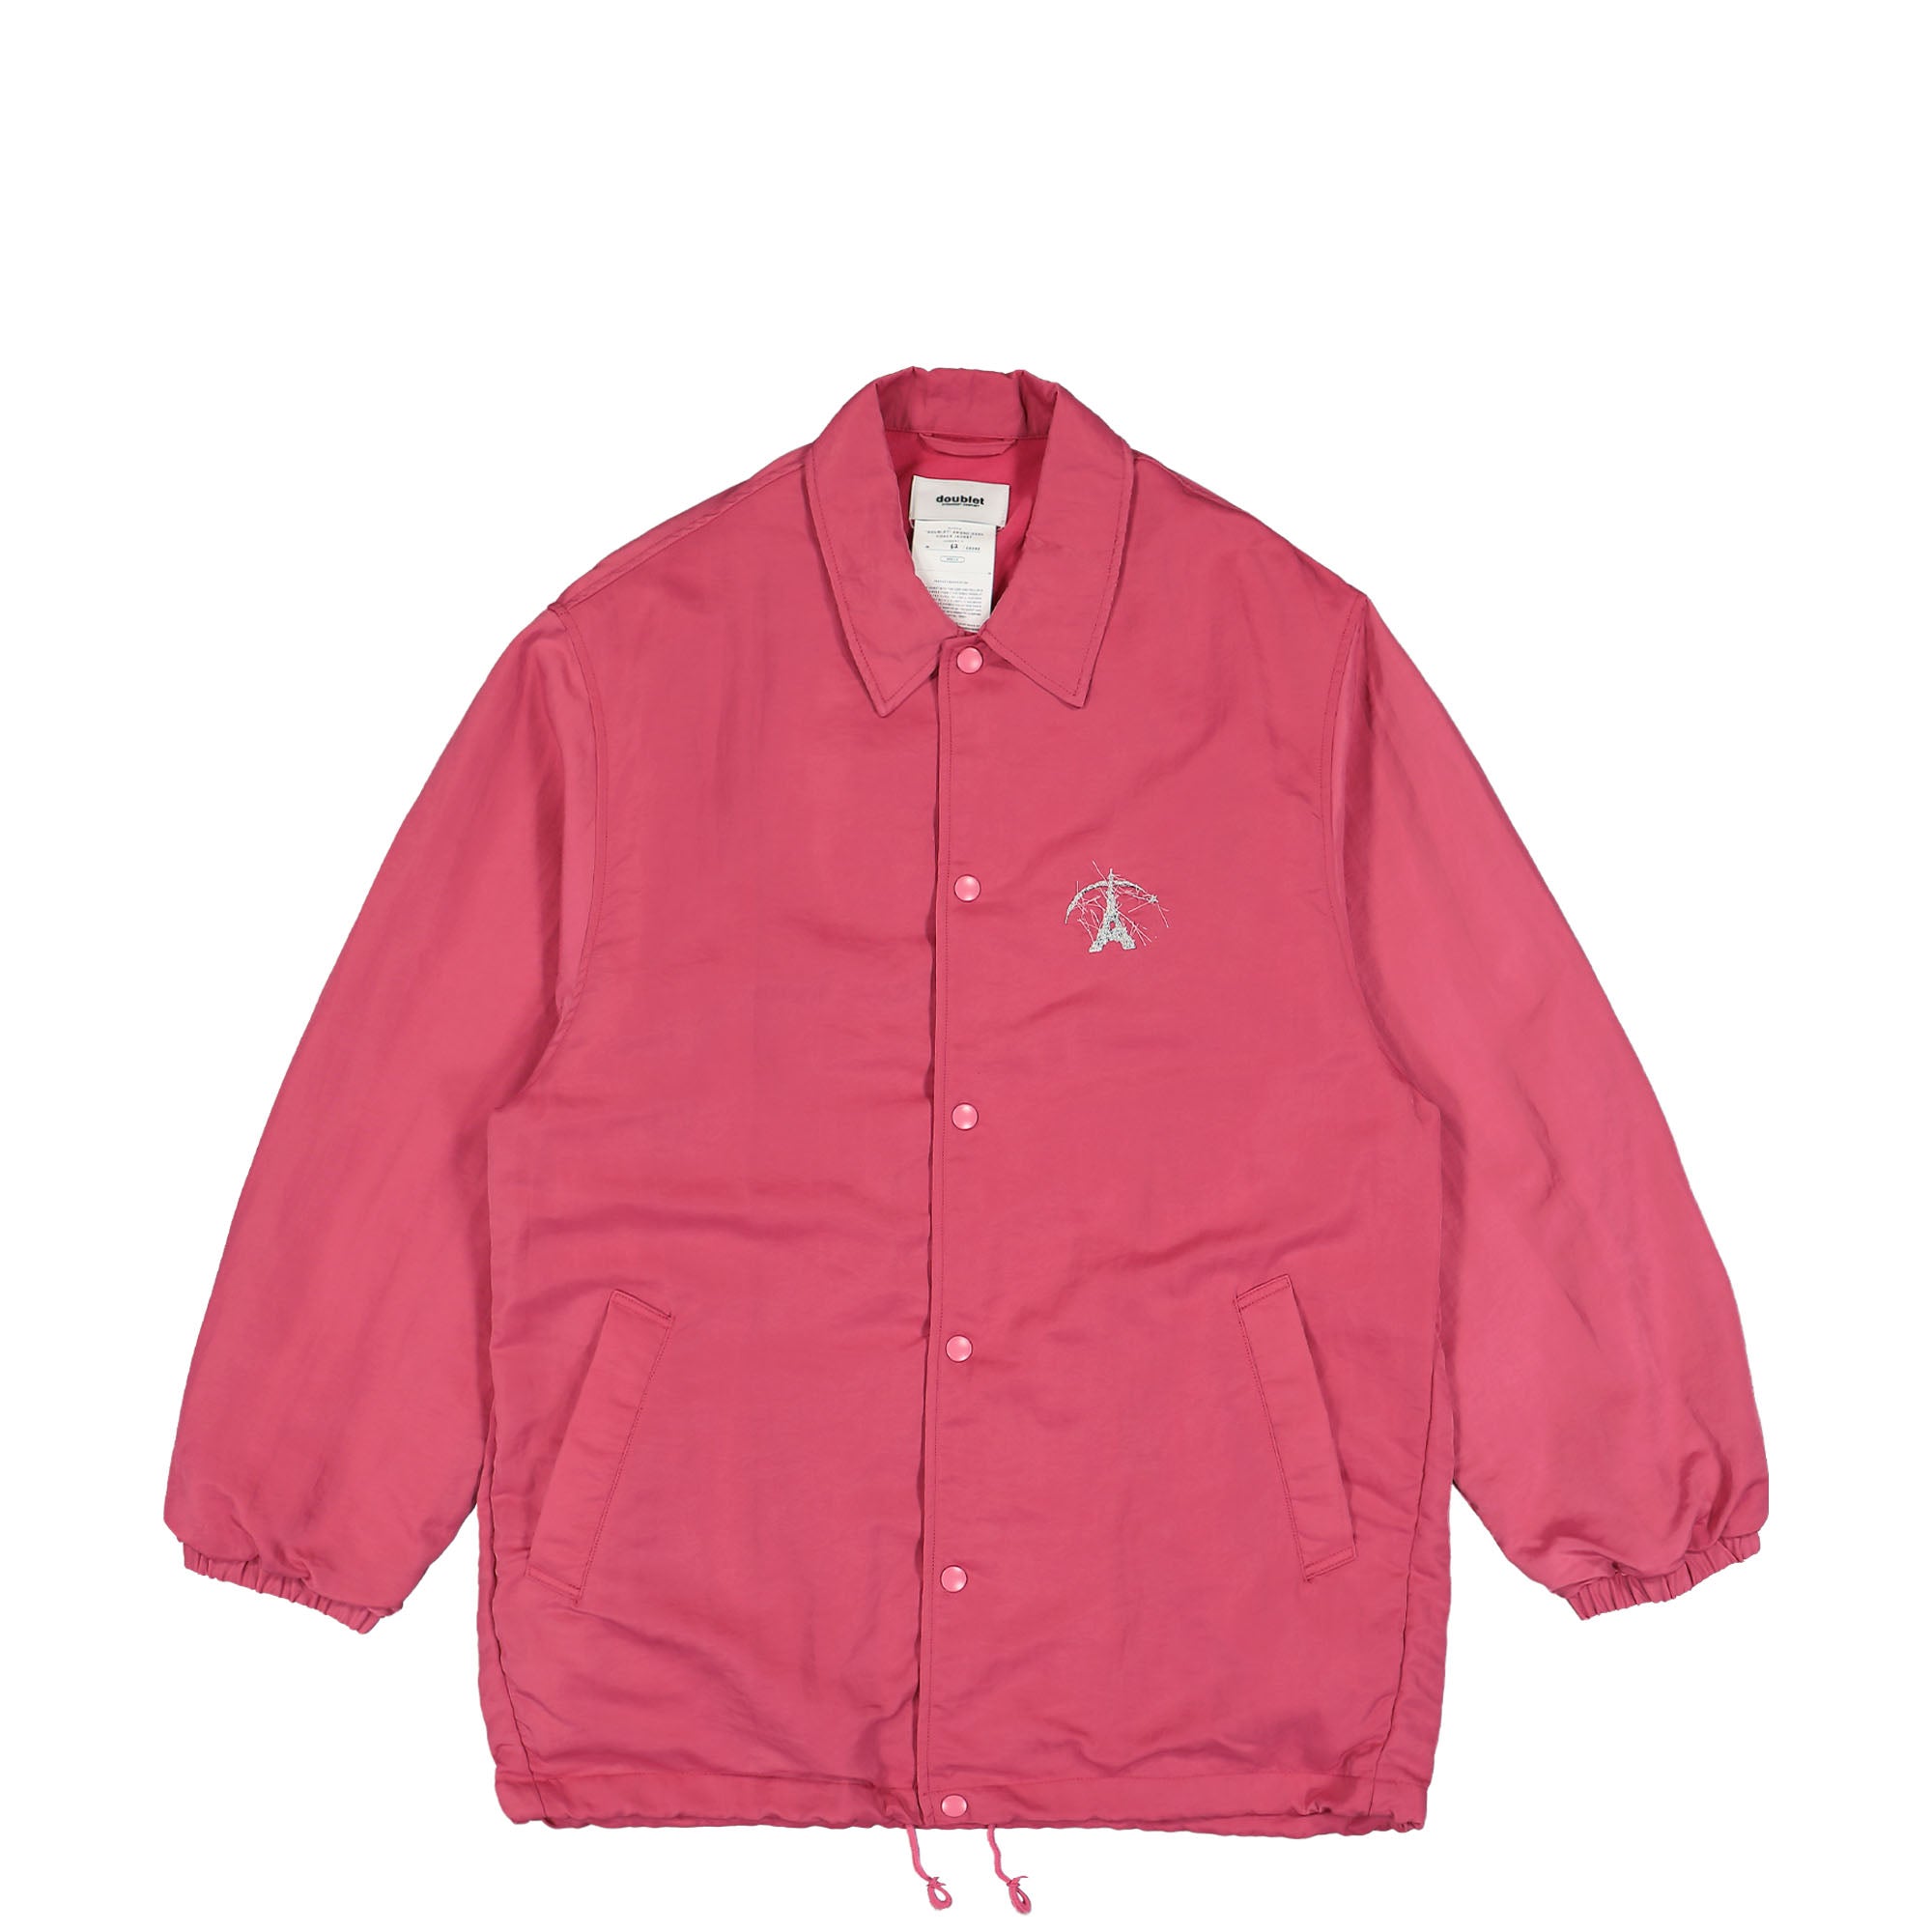 doublet PACKAGE COACHES JACKET - ナイロンジャケット